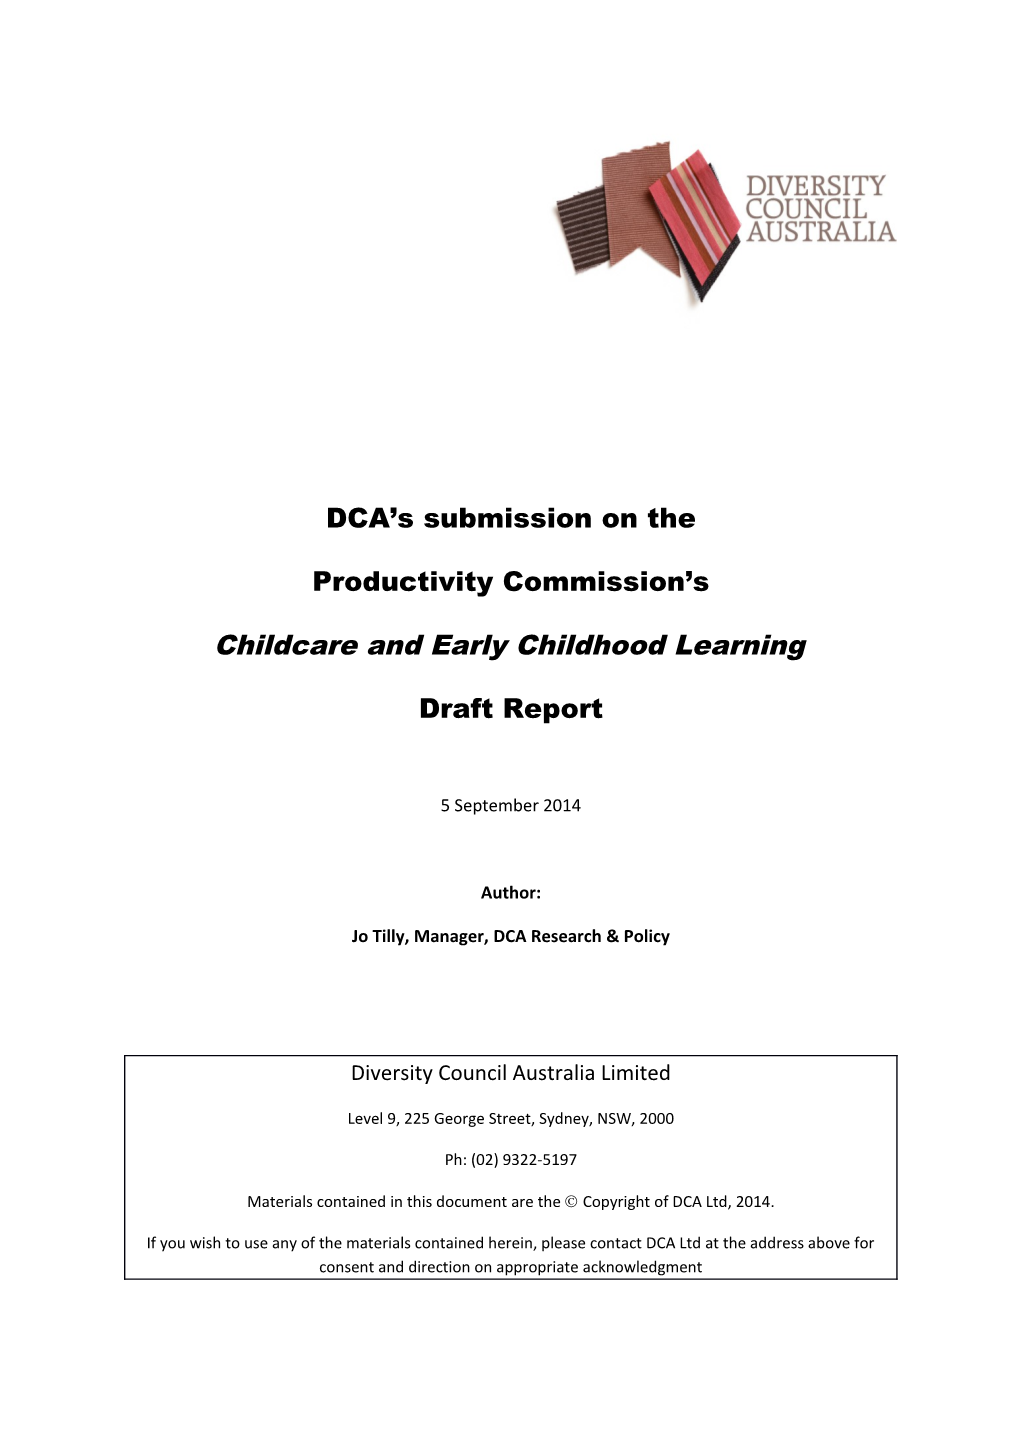 Submission DR802 - Diversity Council Australia - Childcare and Early Childhood Learning